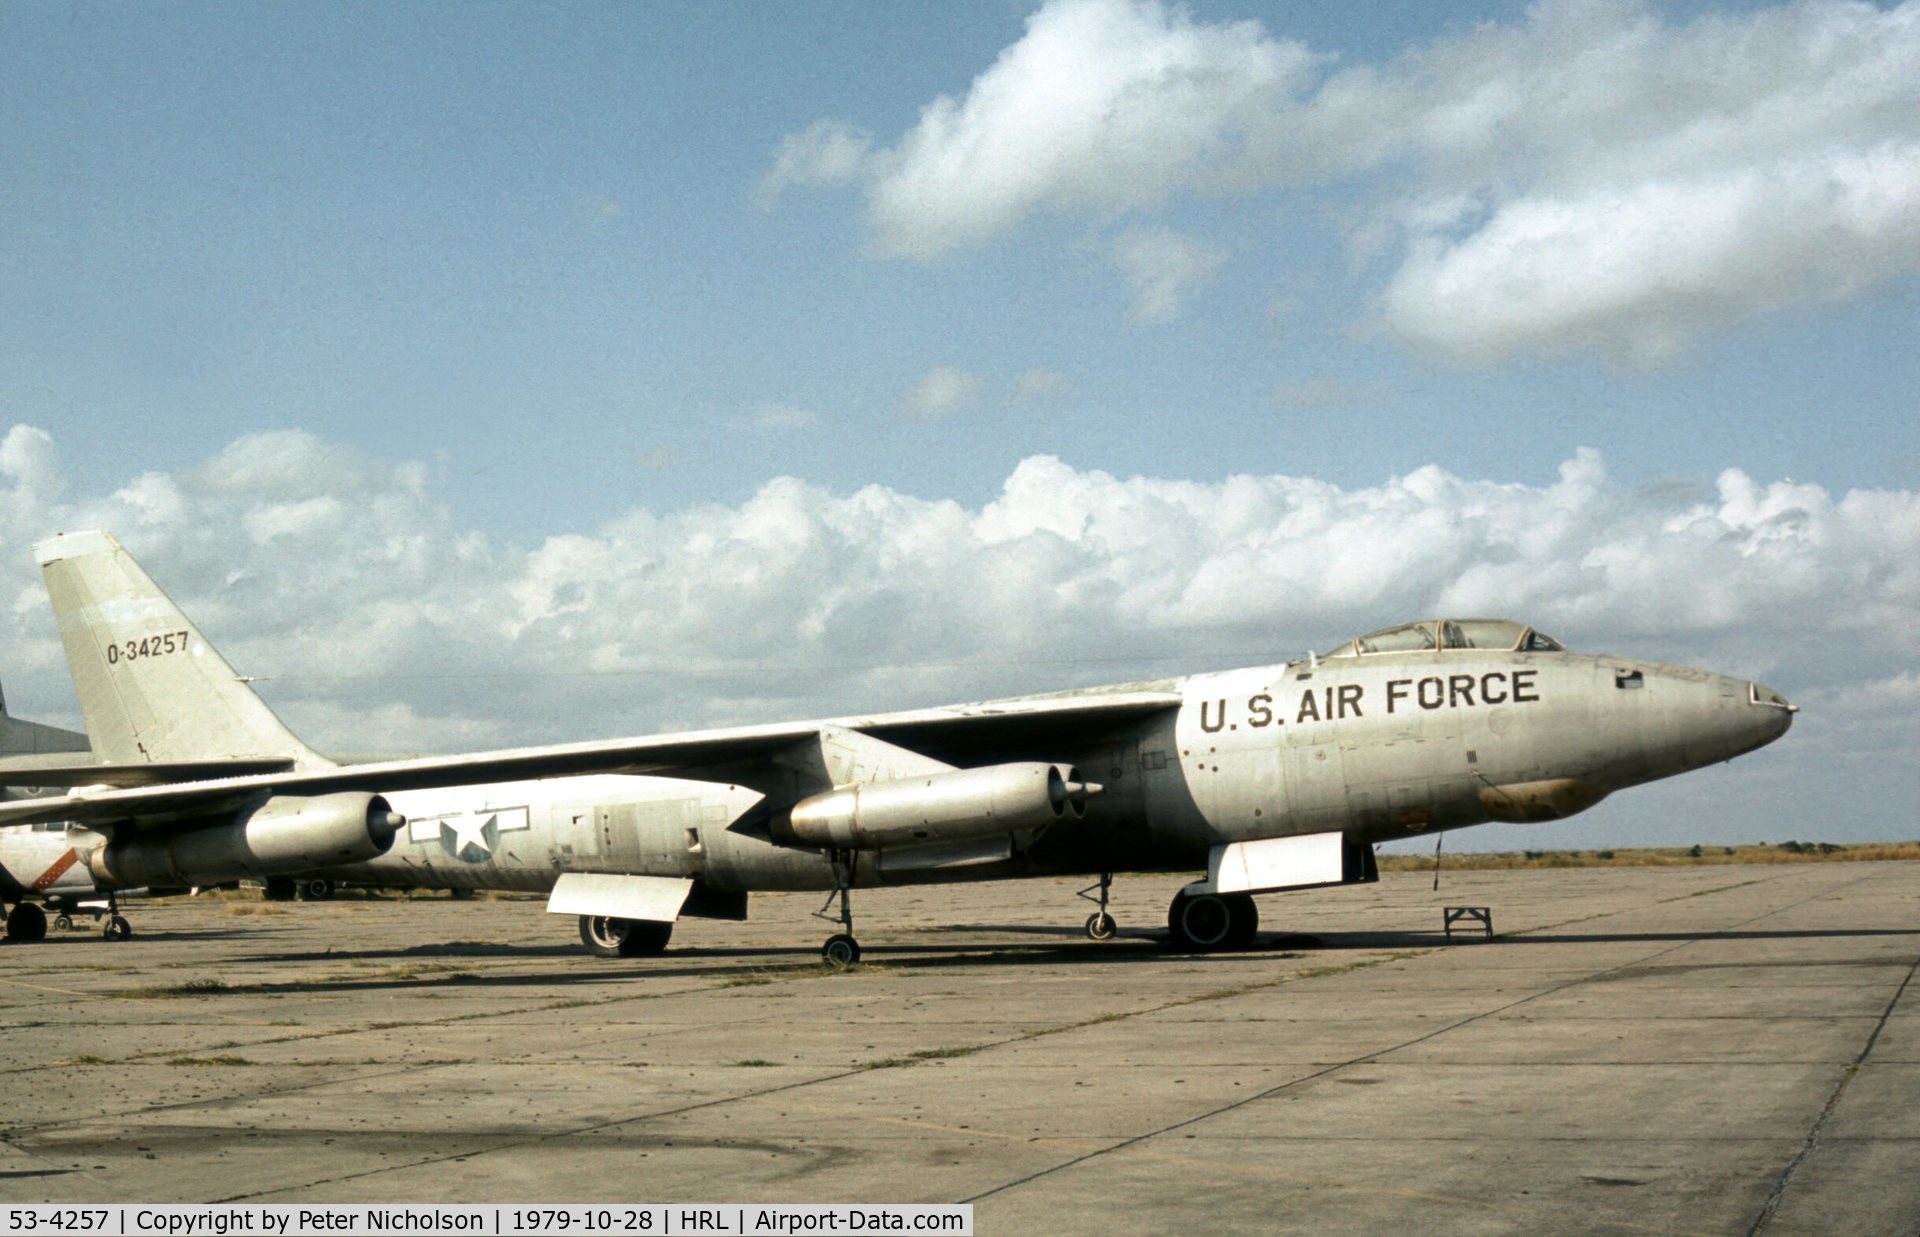 53-4257, 1953 Boeing RB-47E-45-BW Stratojet C/N 4501281, RB-47E Stratojet on display at the Confederate Air Force's Harlingen base in October 1979.